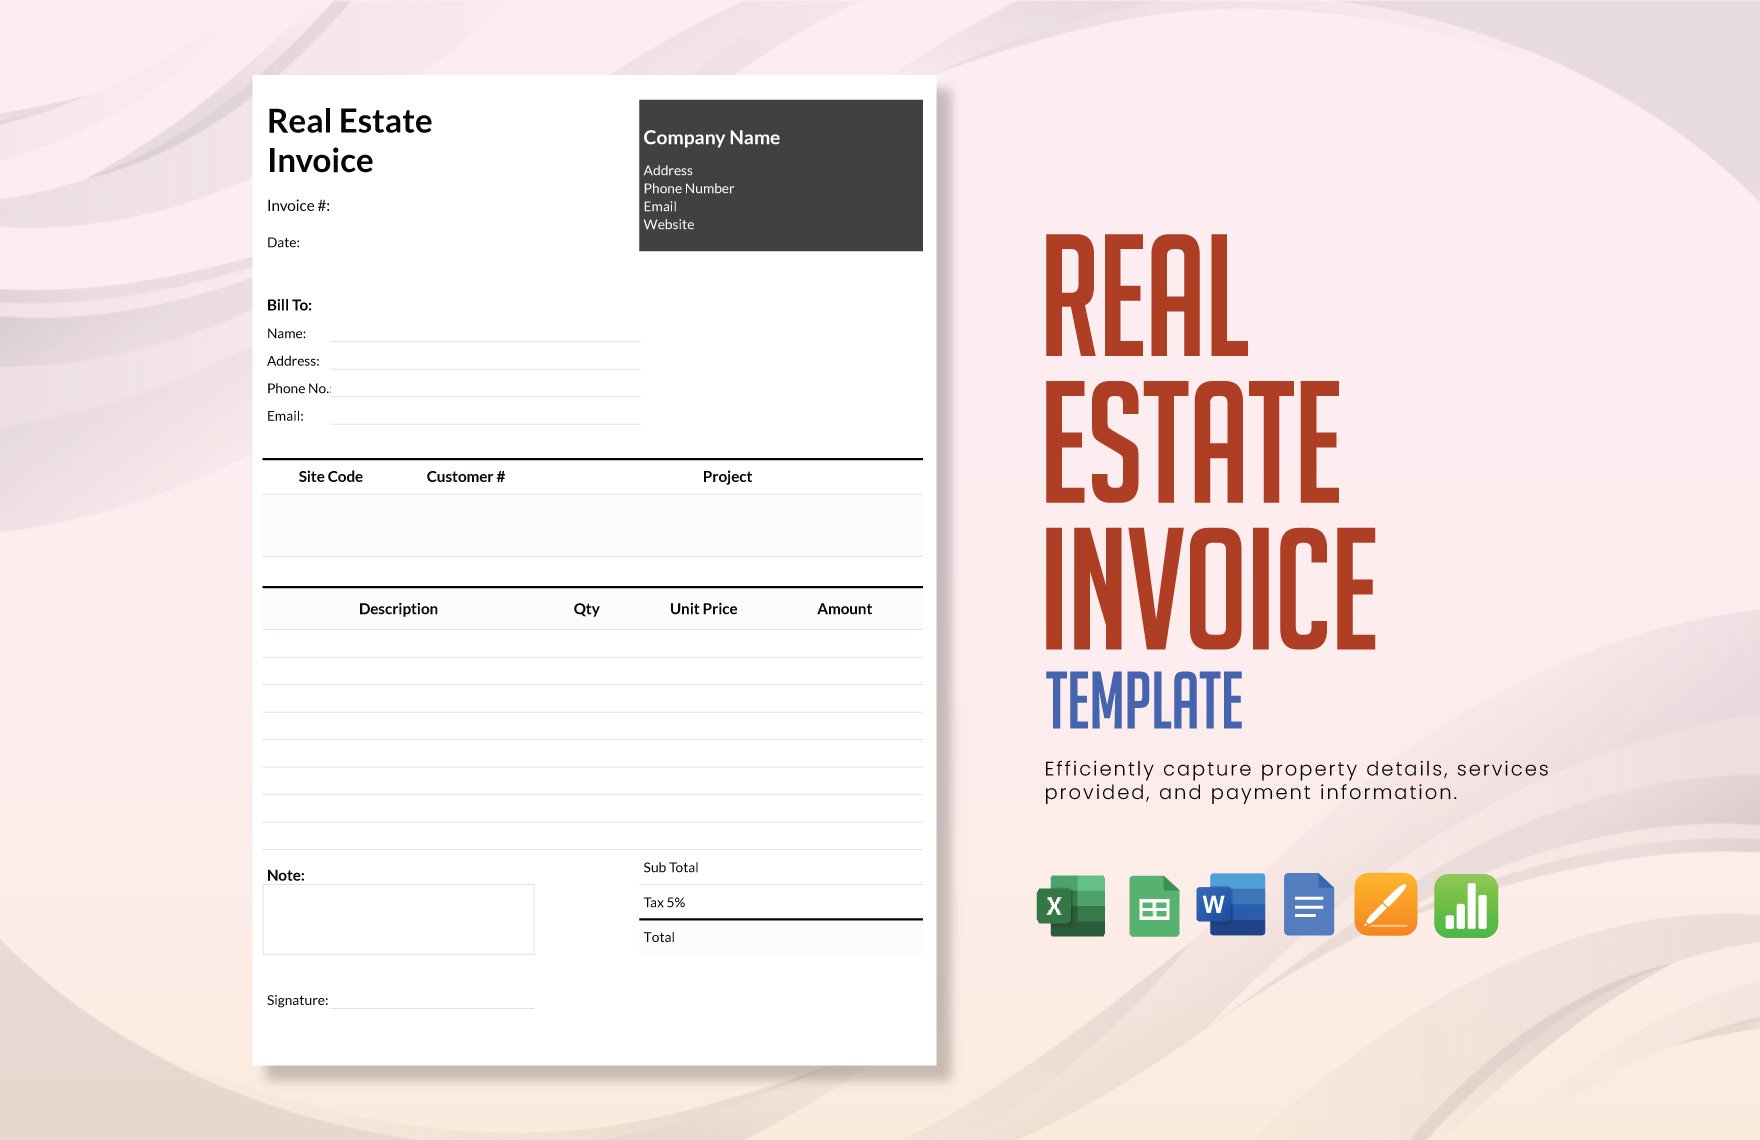 Real Estate Invoice Template in Word, Google Docs, Excel, Google Sheets, Apple Pages, Apple Numbers